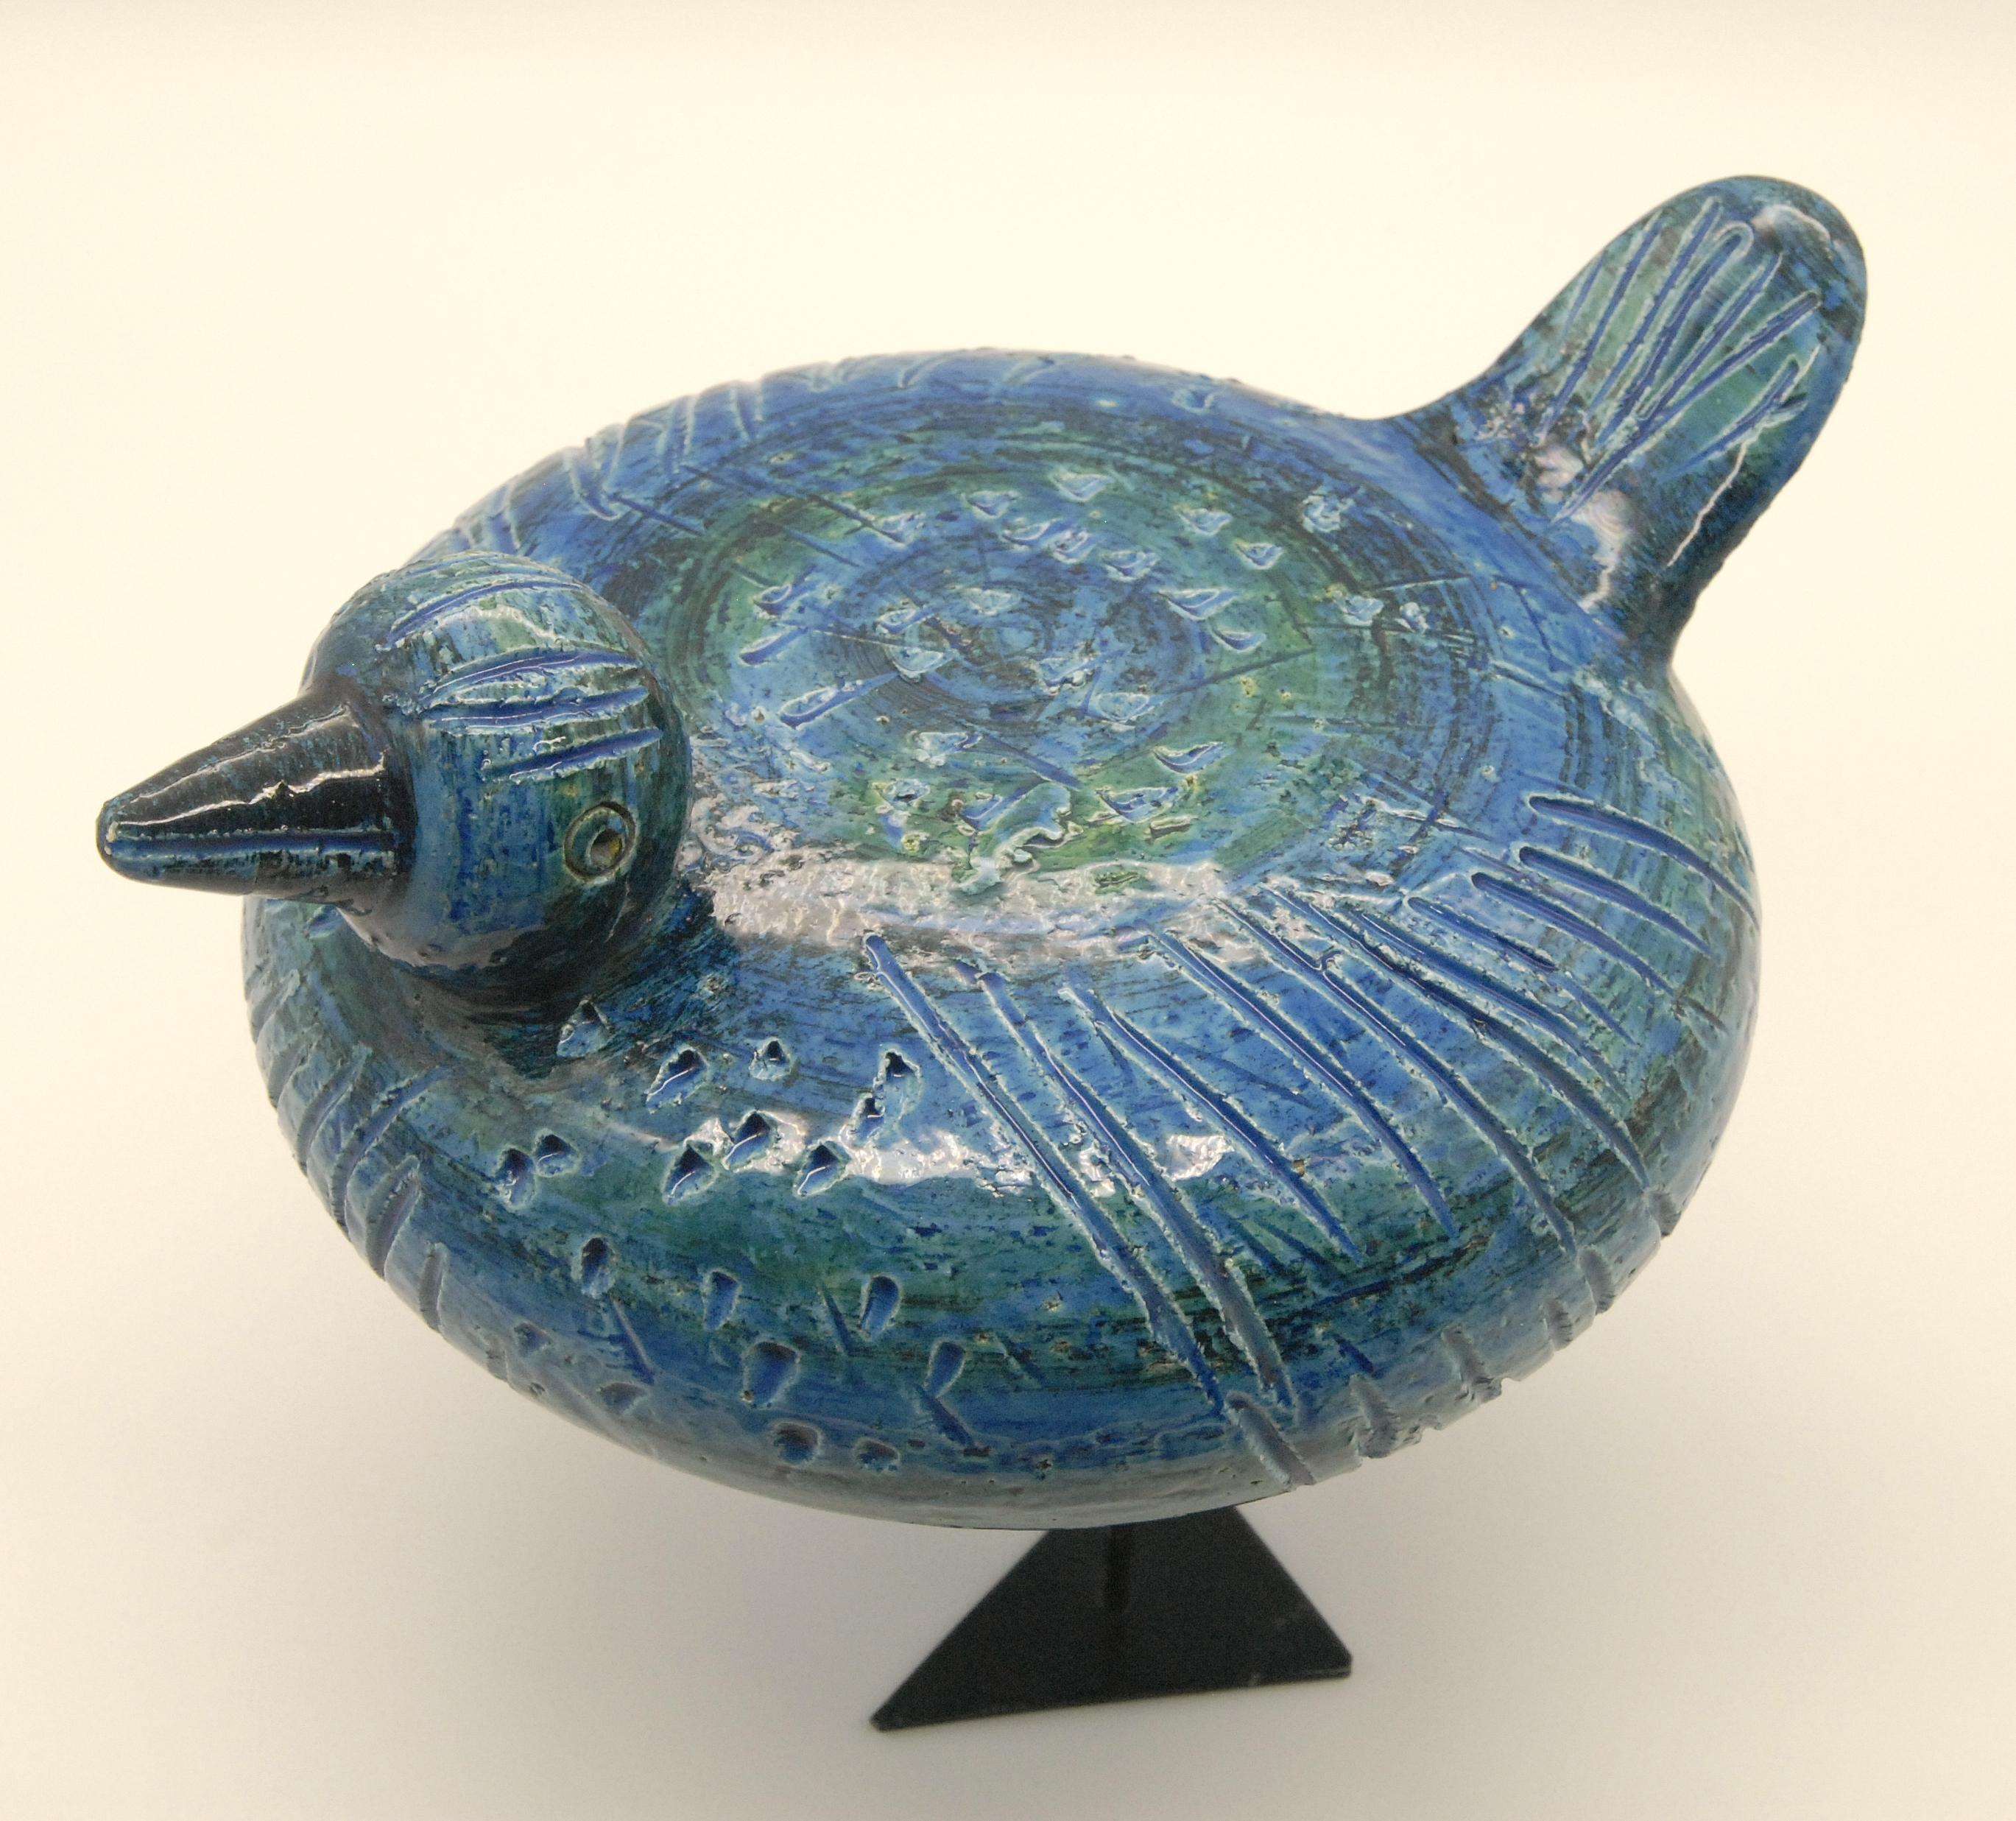 An Aldo Londi designed blue duck decorated with sgraffito lines and dots standing on 2 original steel feet.
Signed 1702 Italy in black underneath.